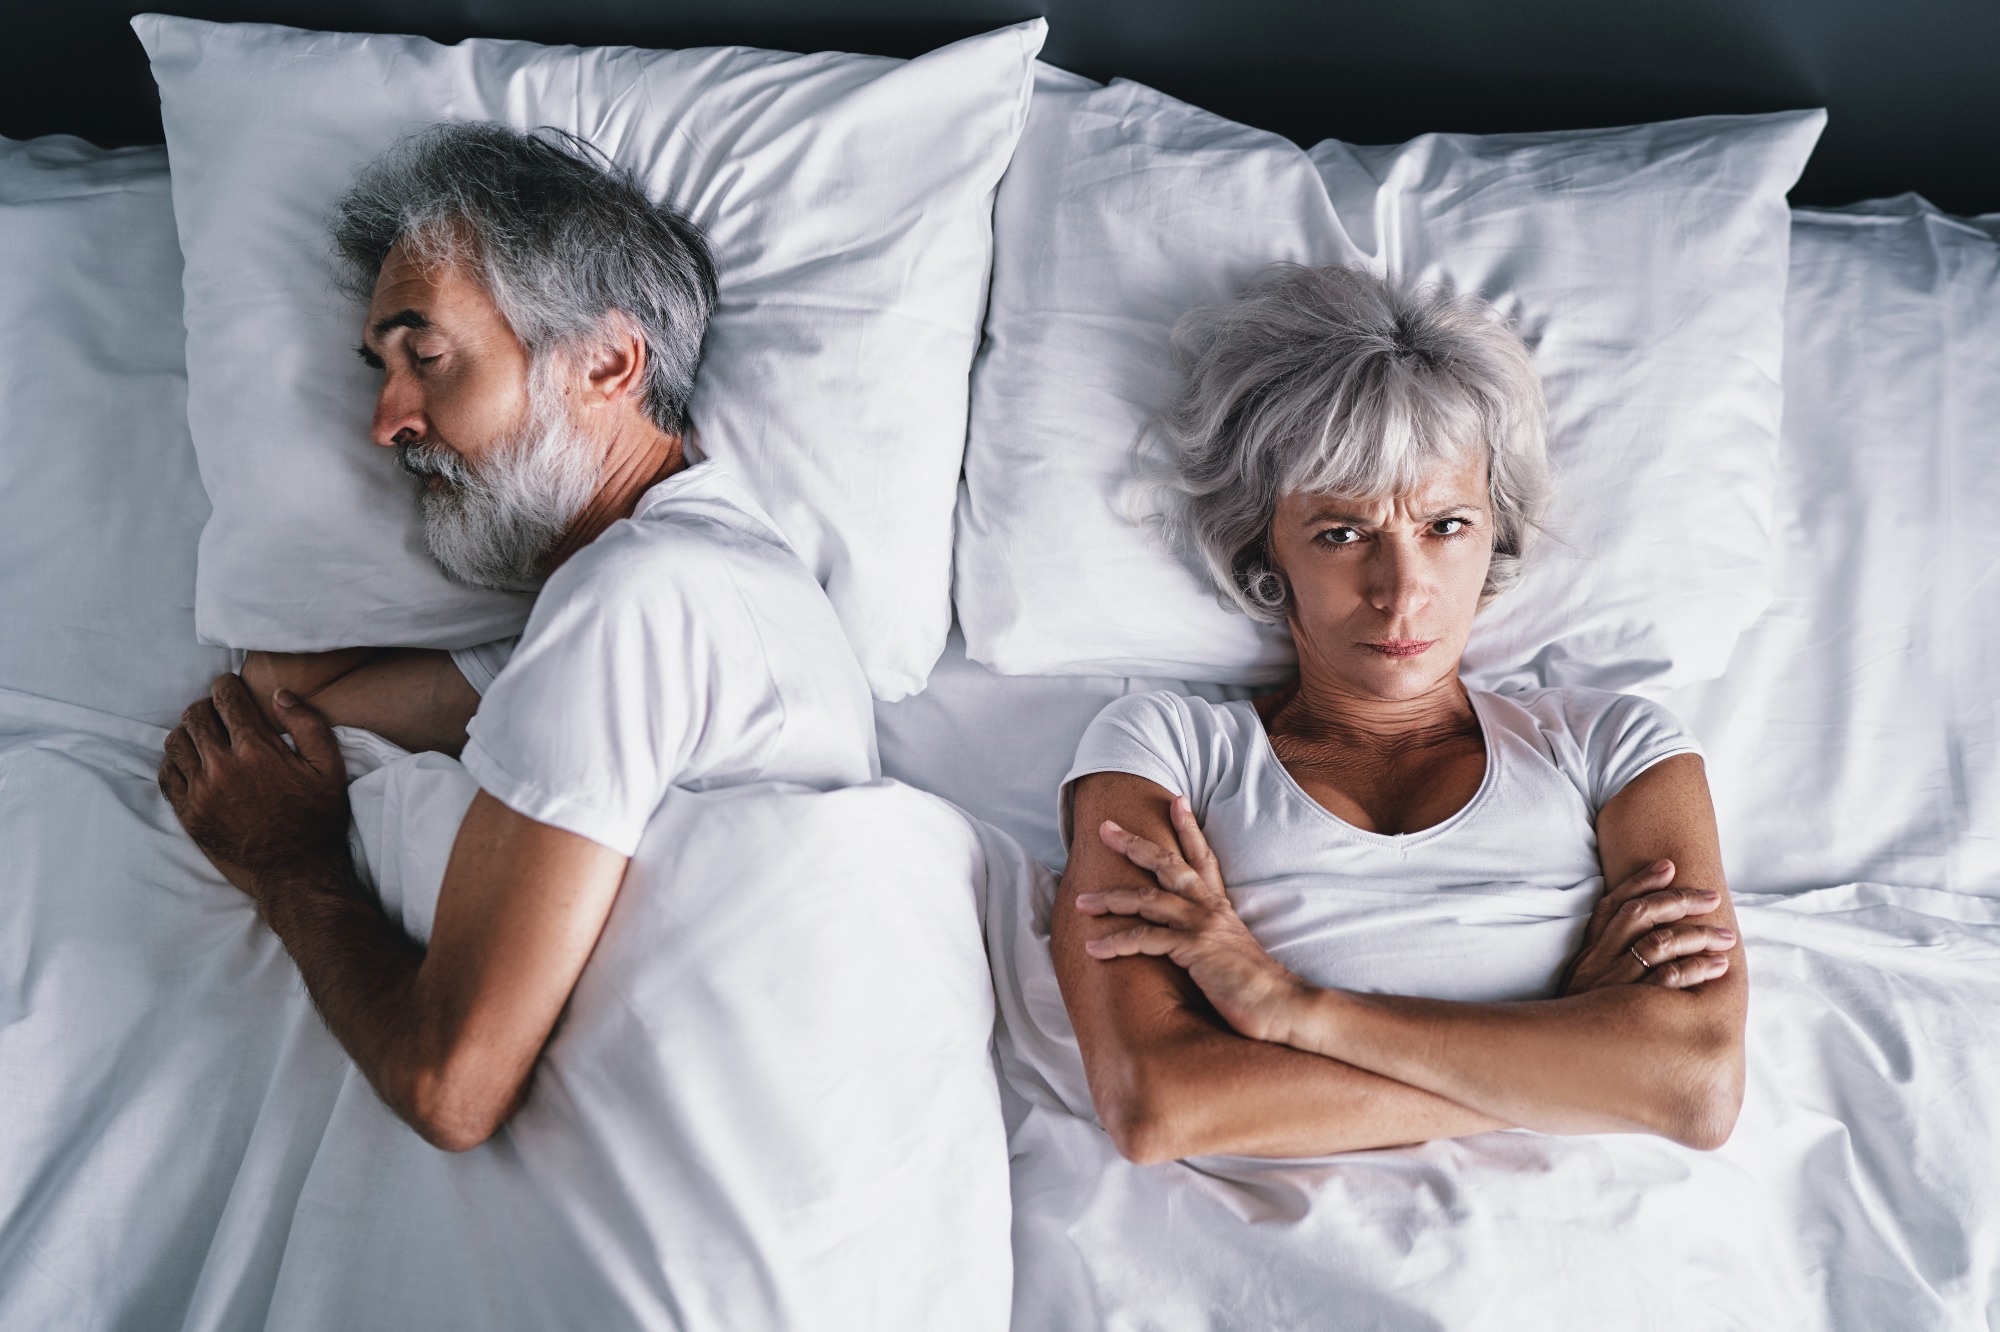 Study: Association of sleep duration at age 50, 60, and 70 years with risk of multimorbidity in the UK: 25-year follow-up of the Whitehall II cohort study. Image Credit: kudla / Shutterstock